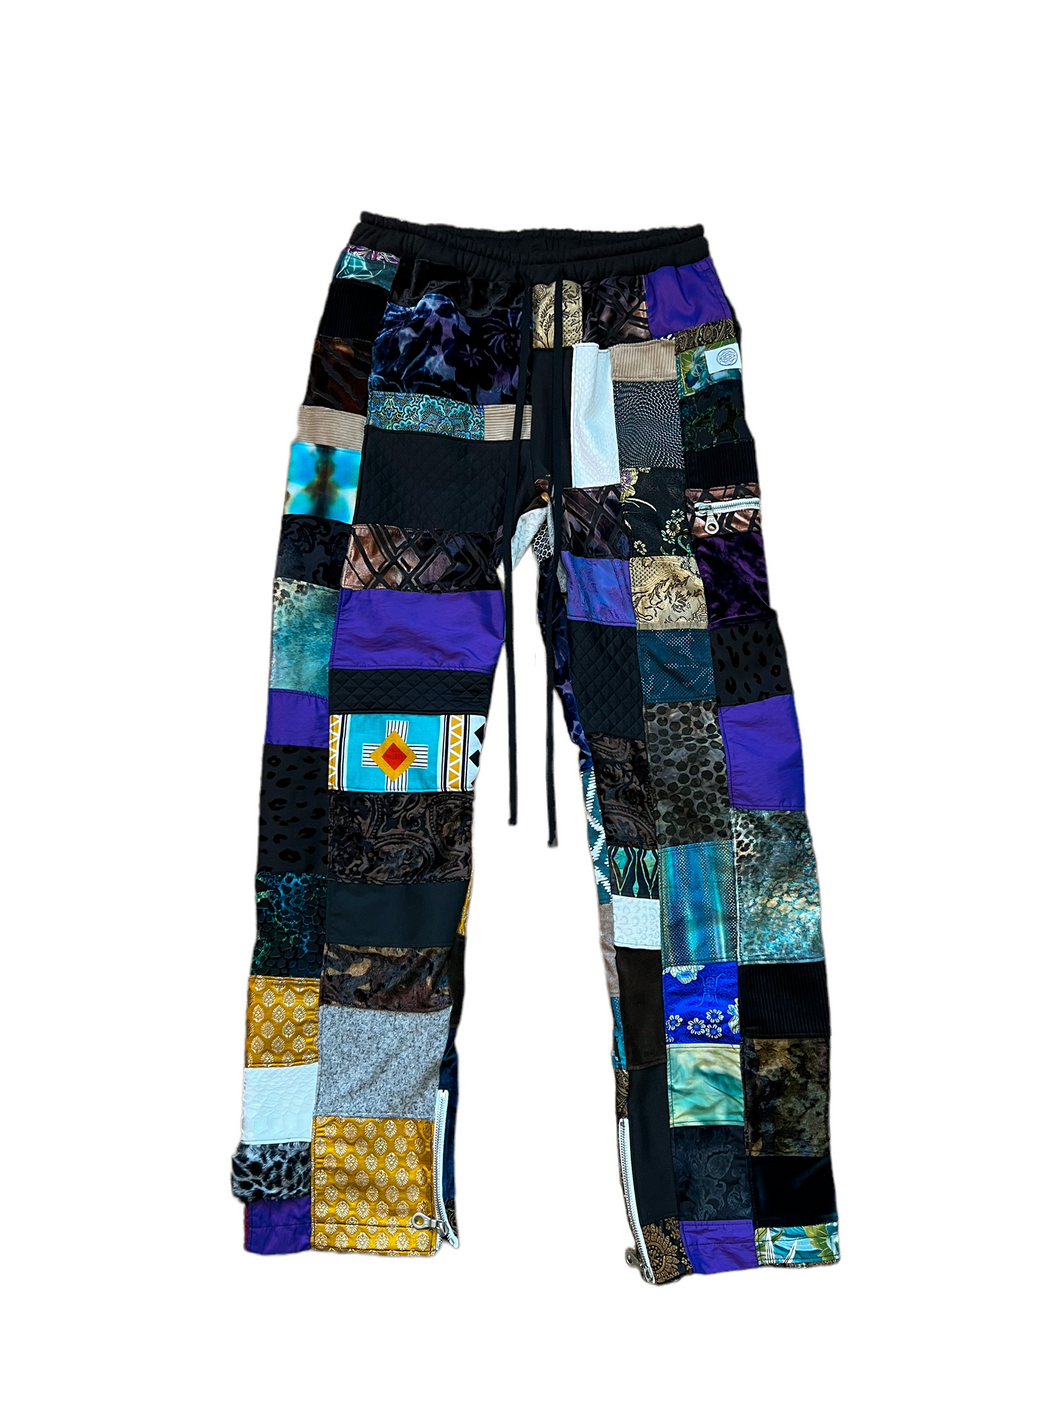 1 of 1 ROYAL PATCHWORK PANTS - S/M